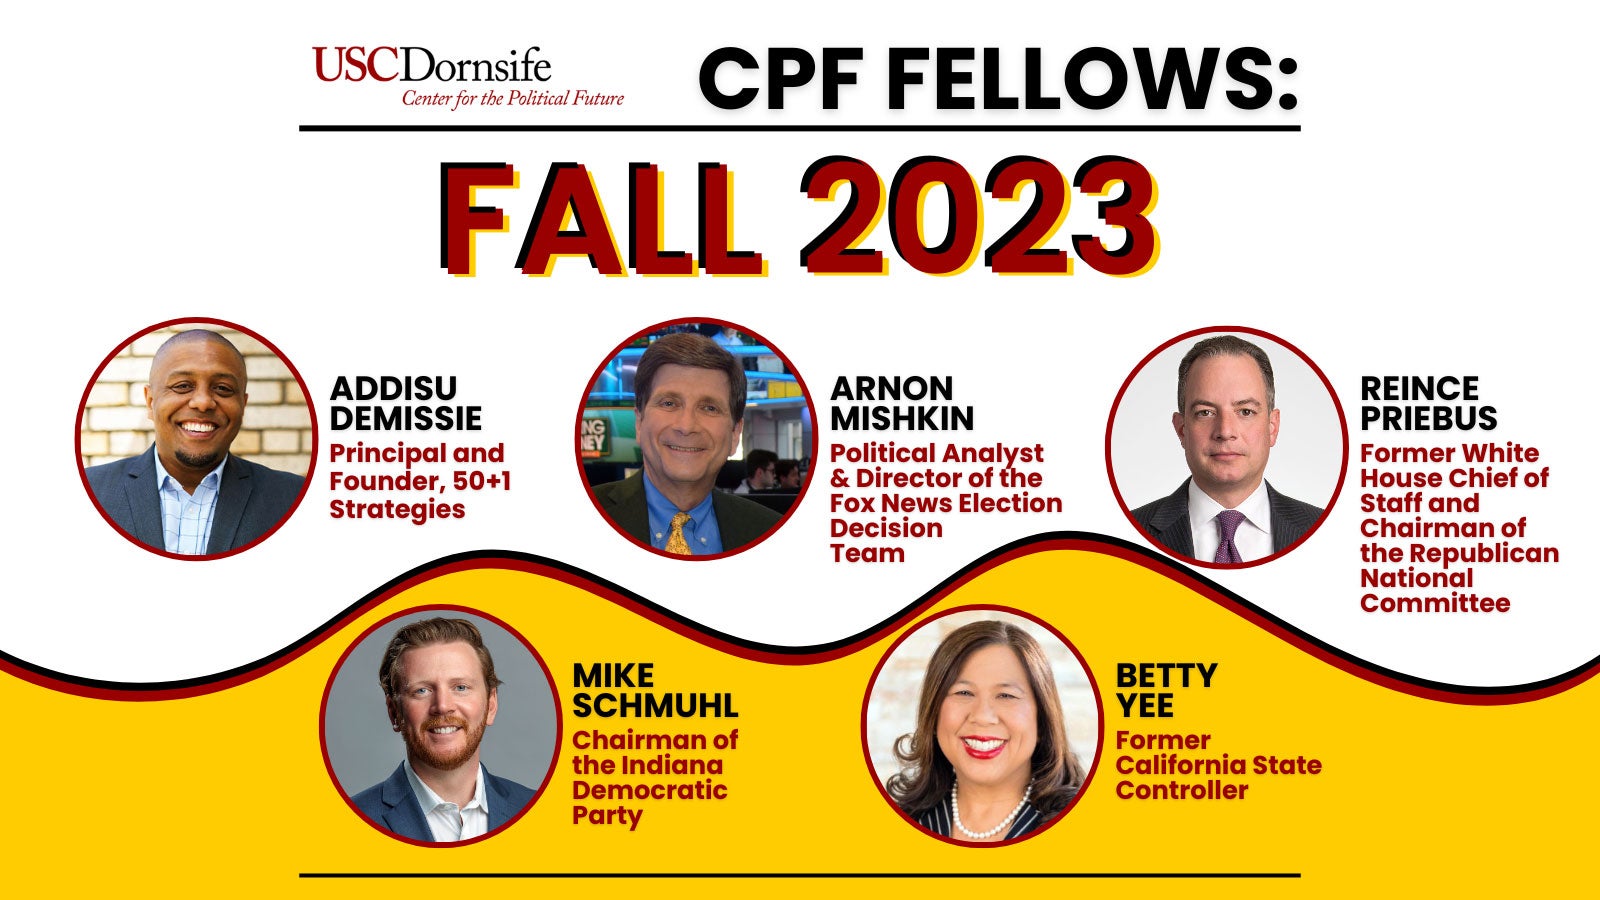 Graphic highlighting the Fall 2023 CPF Fellows